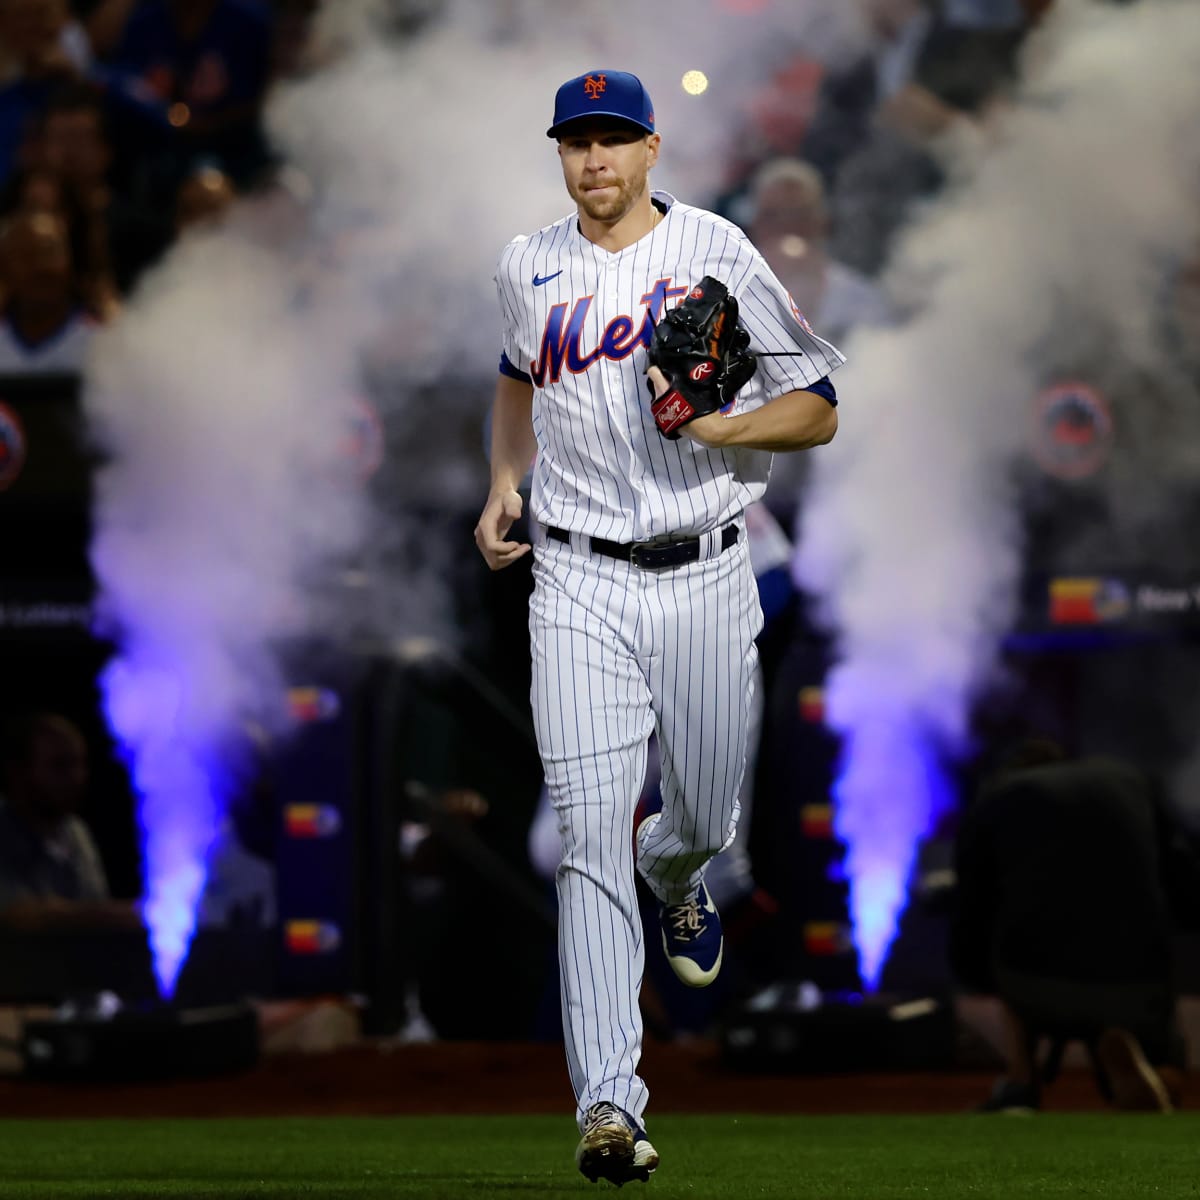 Jacob DeGrom joins the Texas Rangers: Full press conference 